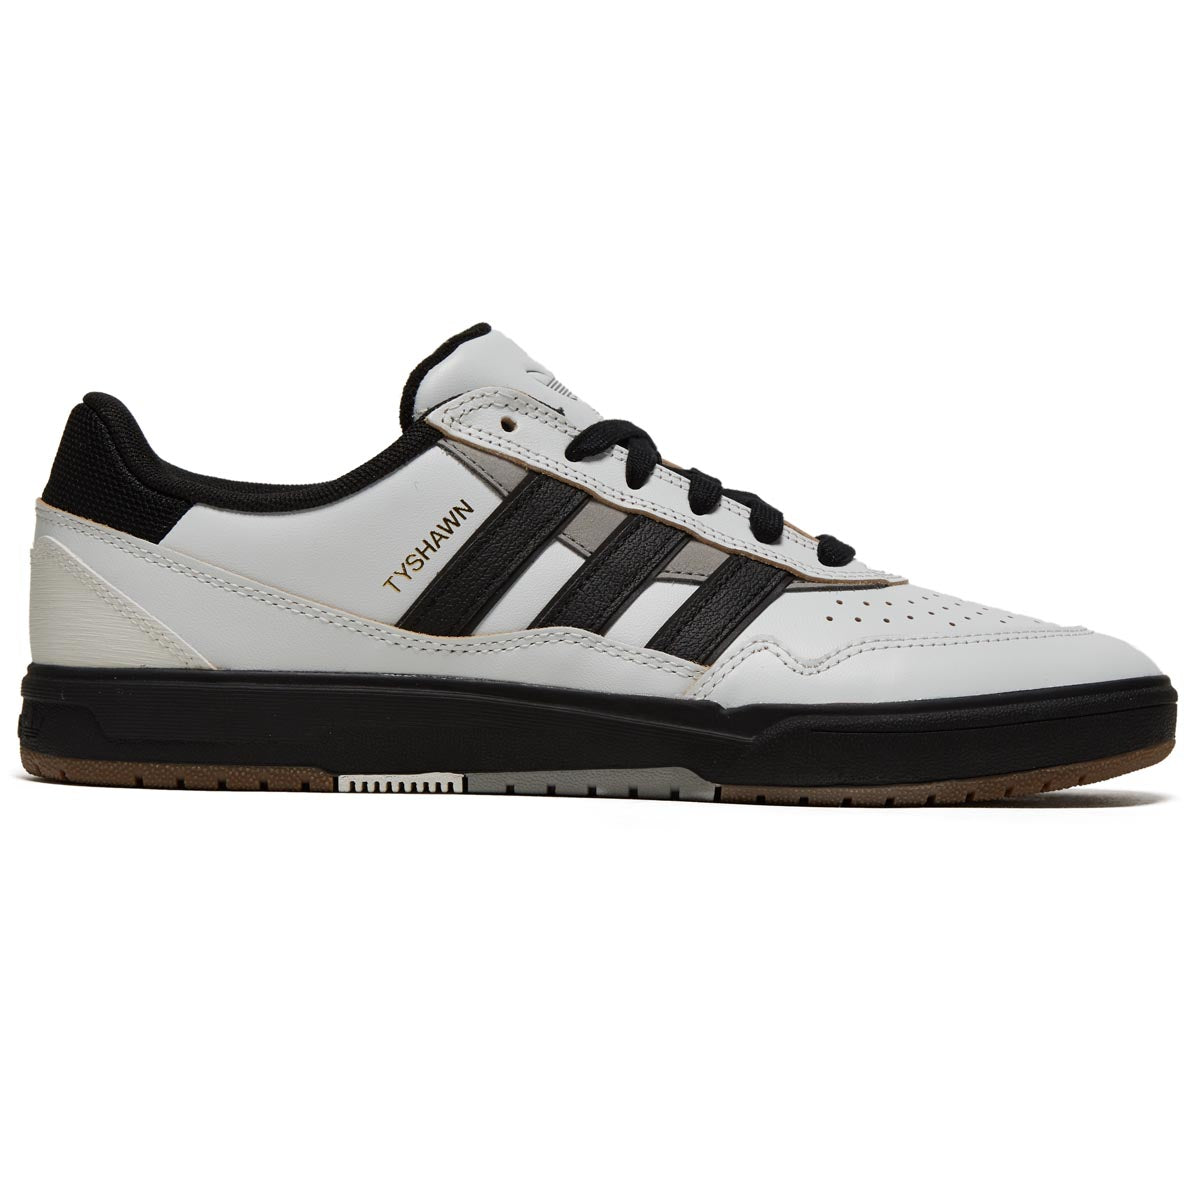 Adidas Tyshawn II Shoes - Crystal White/Black/Charcoal Solid Grey image 1